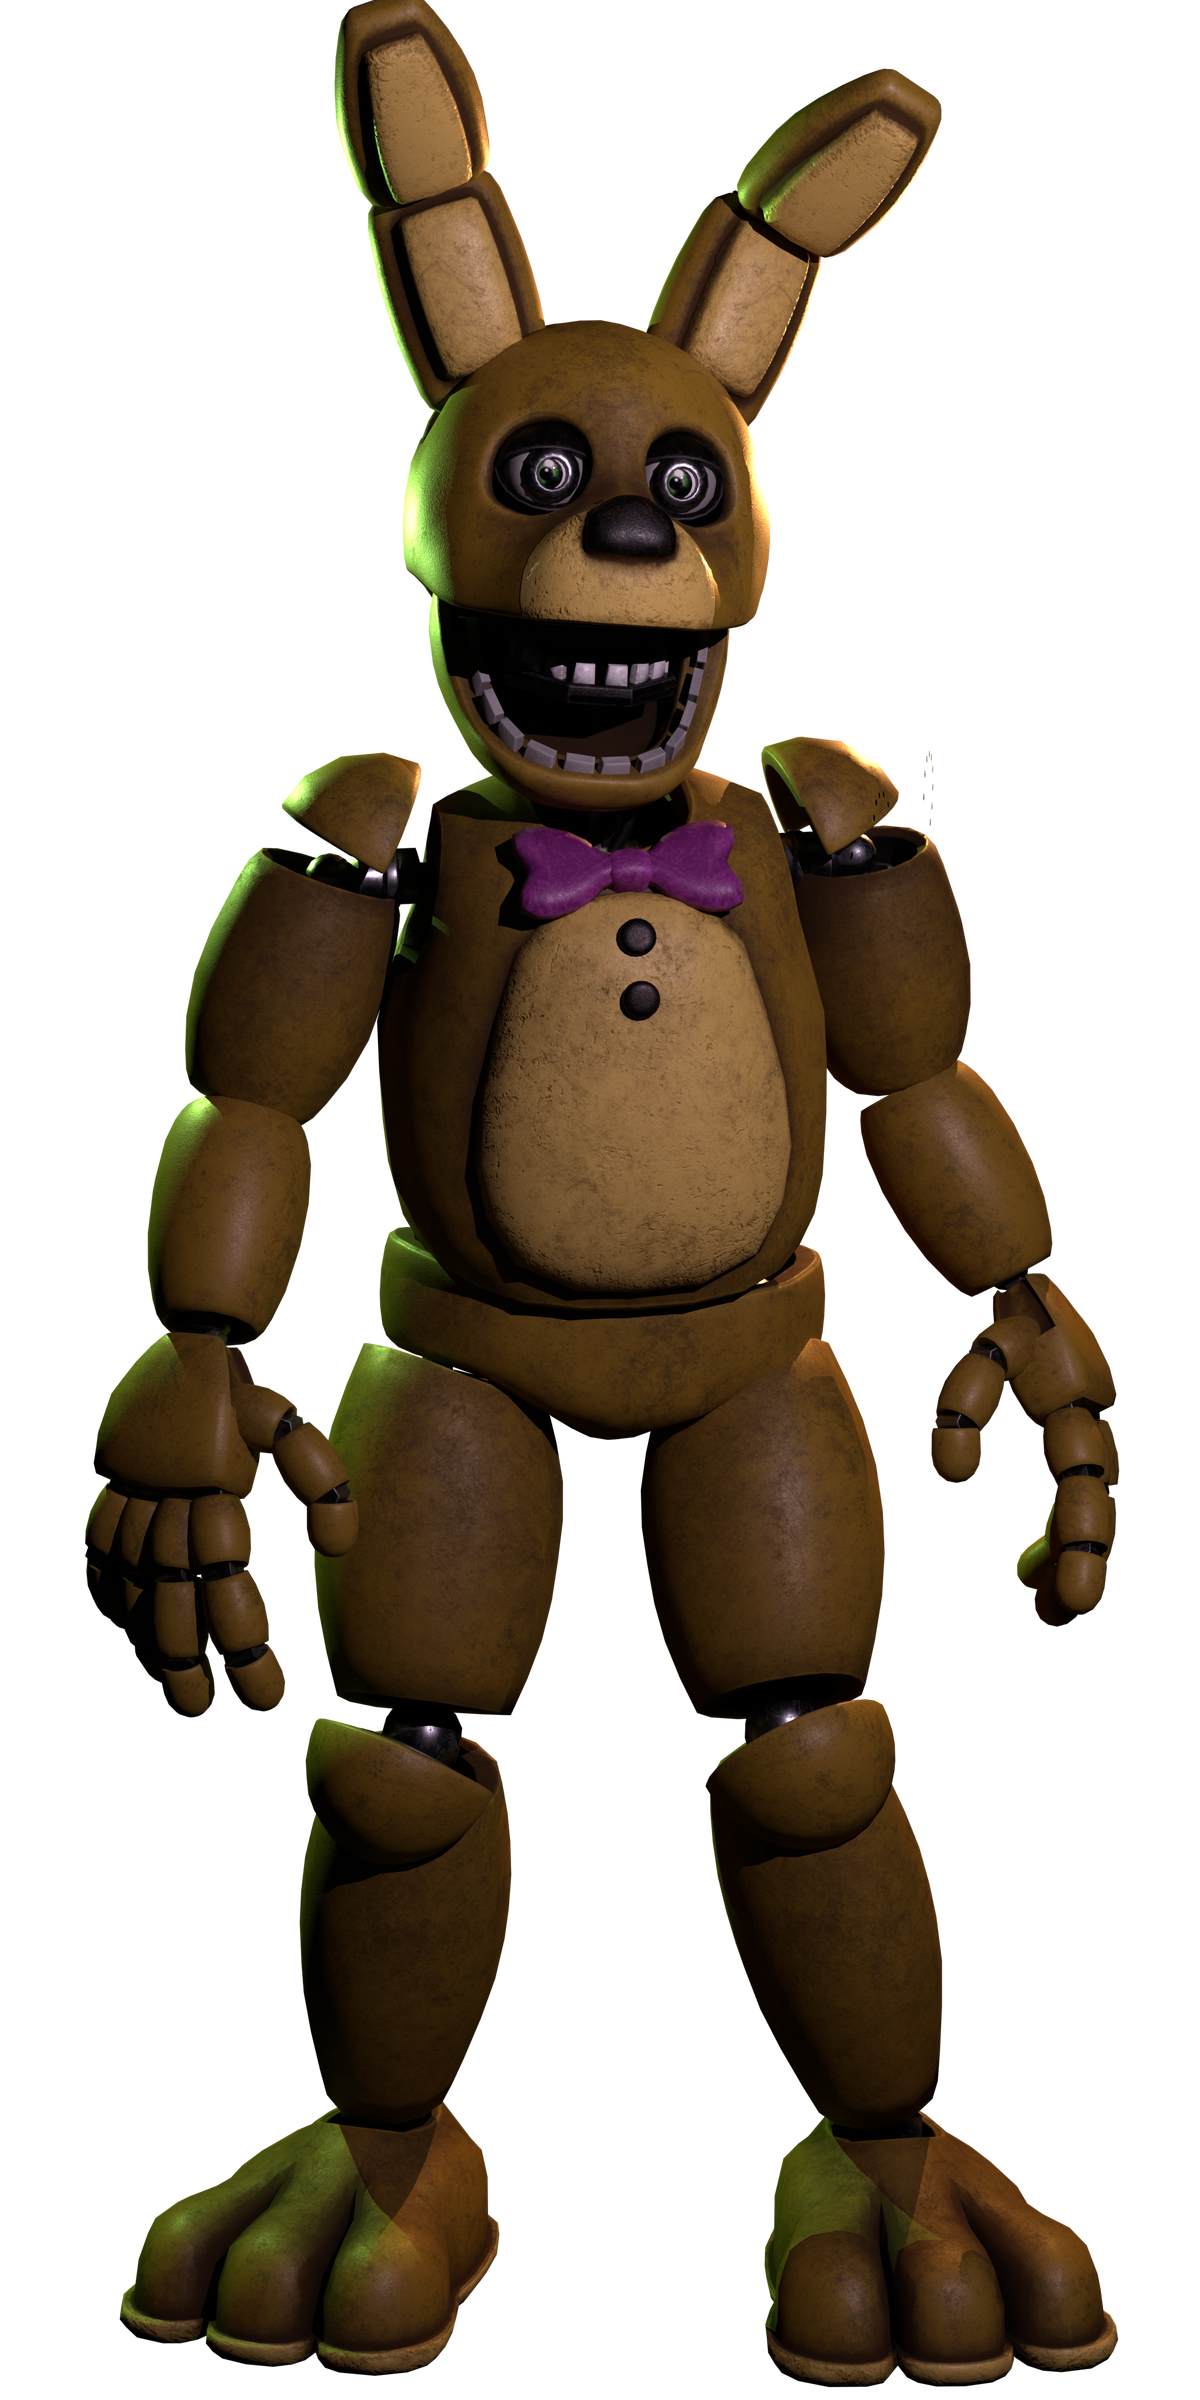 Spring Bonnie (Springtrap) animatronic from Five Nights at Freddy's 3.